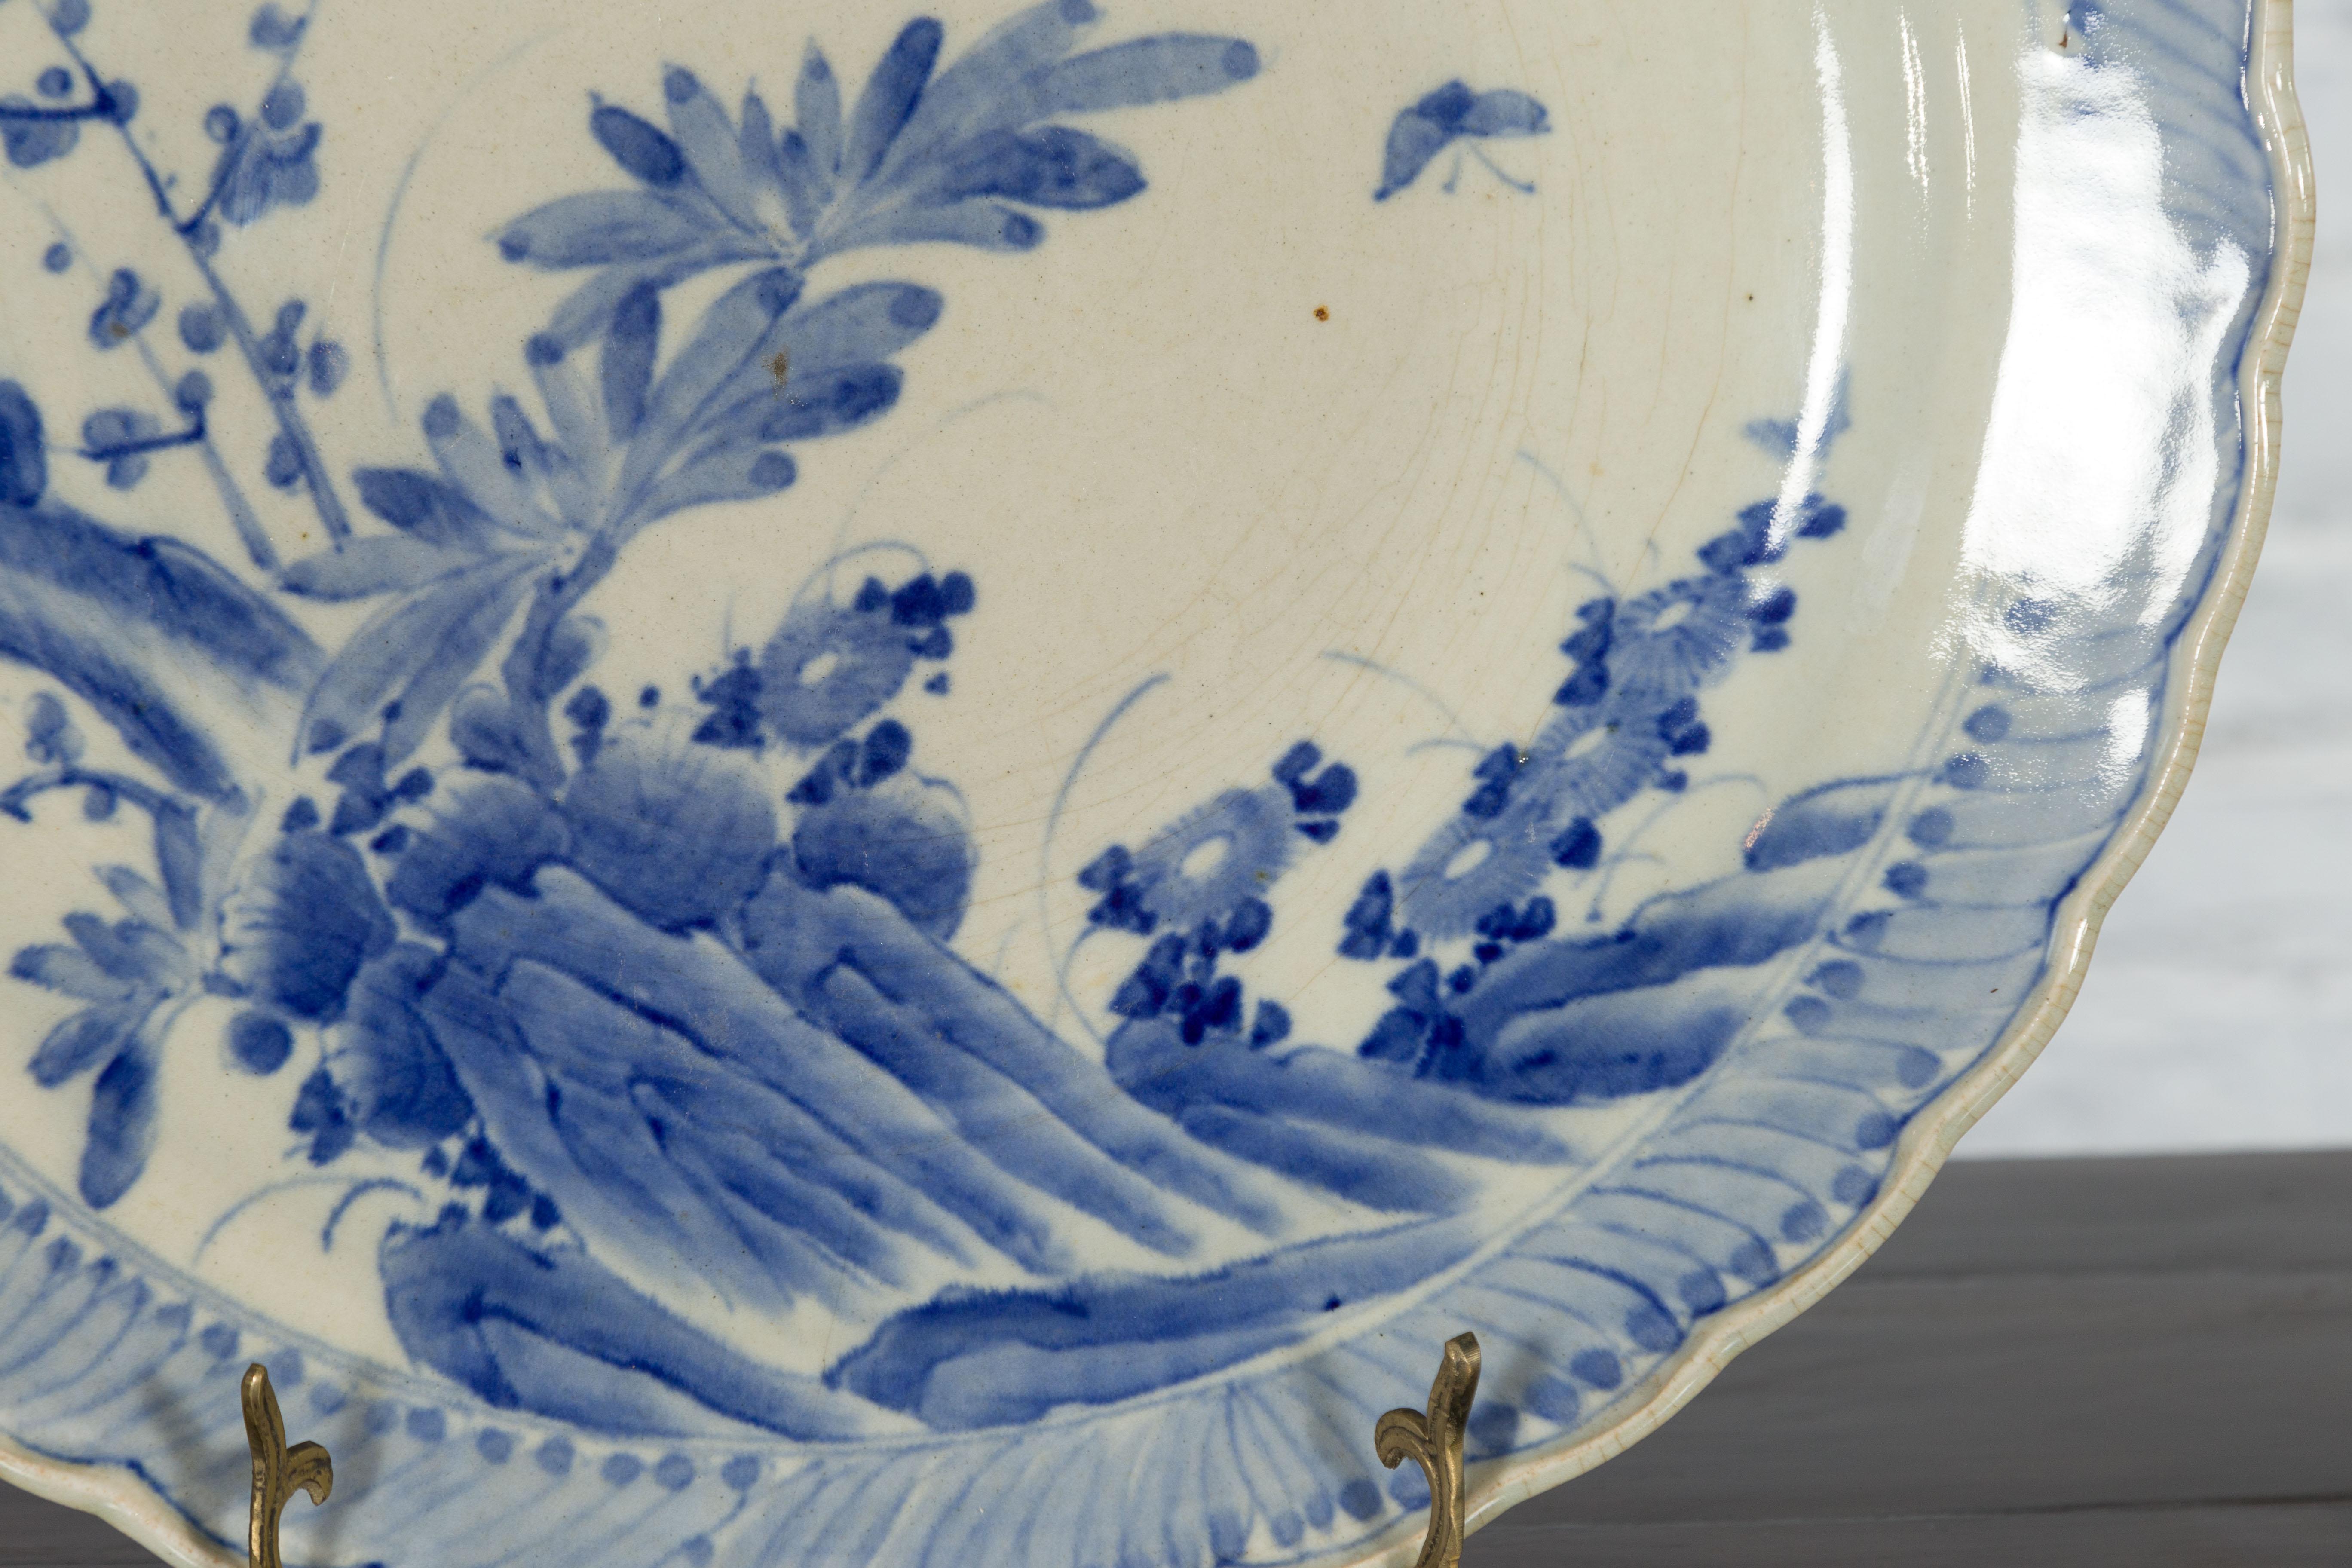 Japanese Hand-Painted Blue and White Porcelain Charger Plate with Foliage Décor For Sale 7